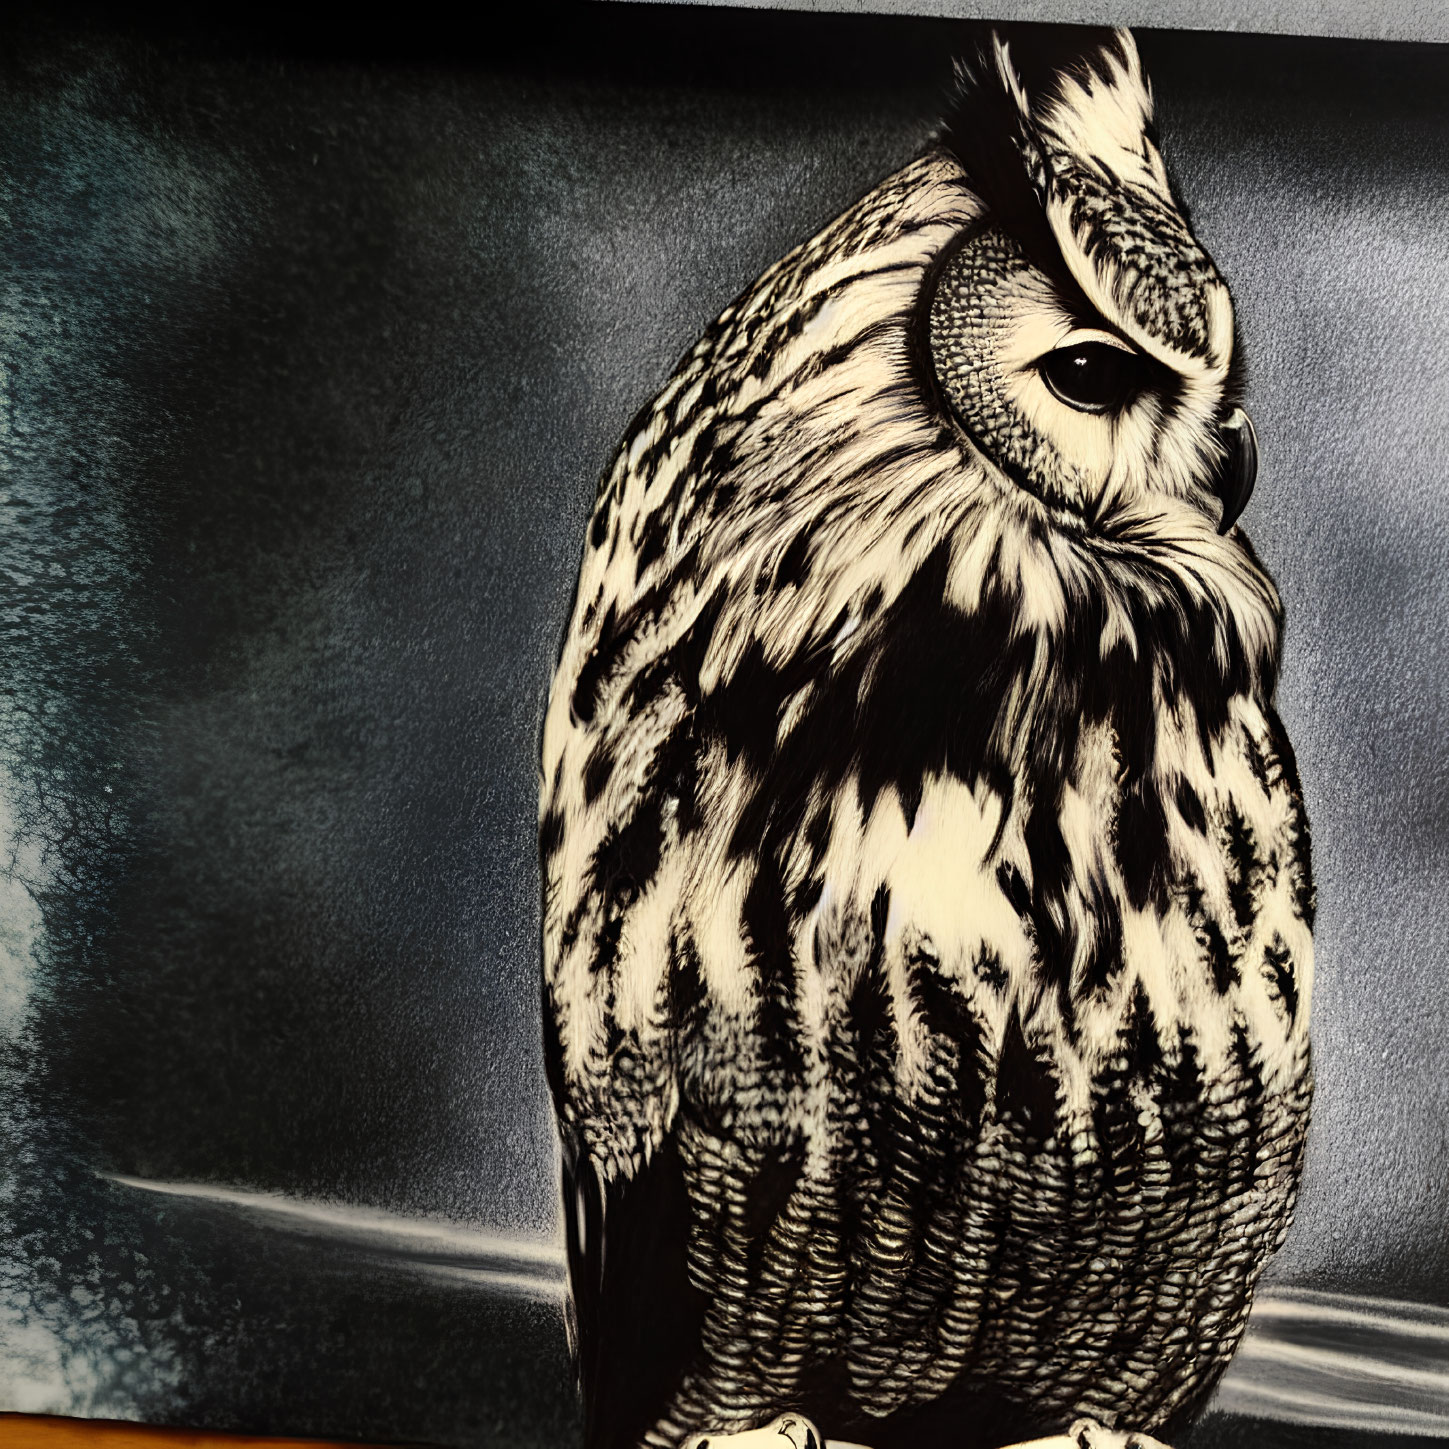 Detailed Black and White Image of Perched Owl with Intricate Feather Patterns